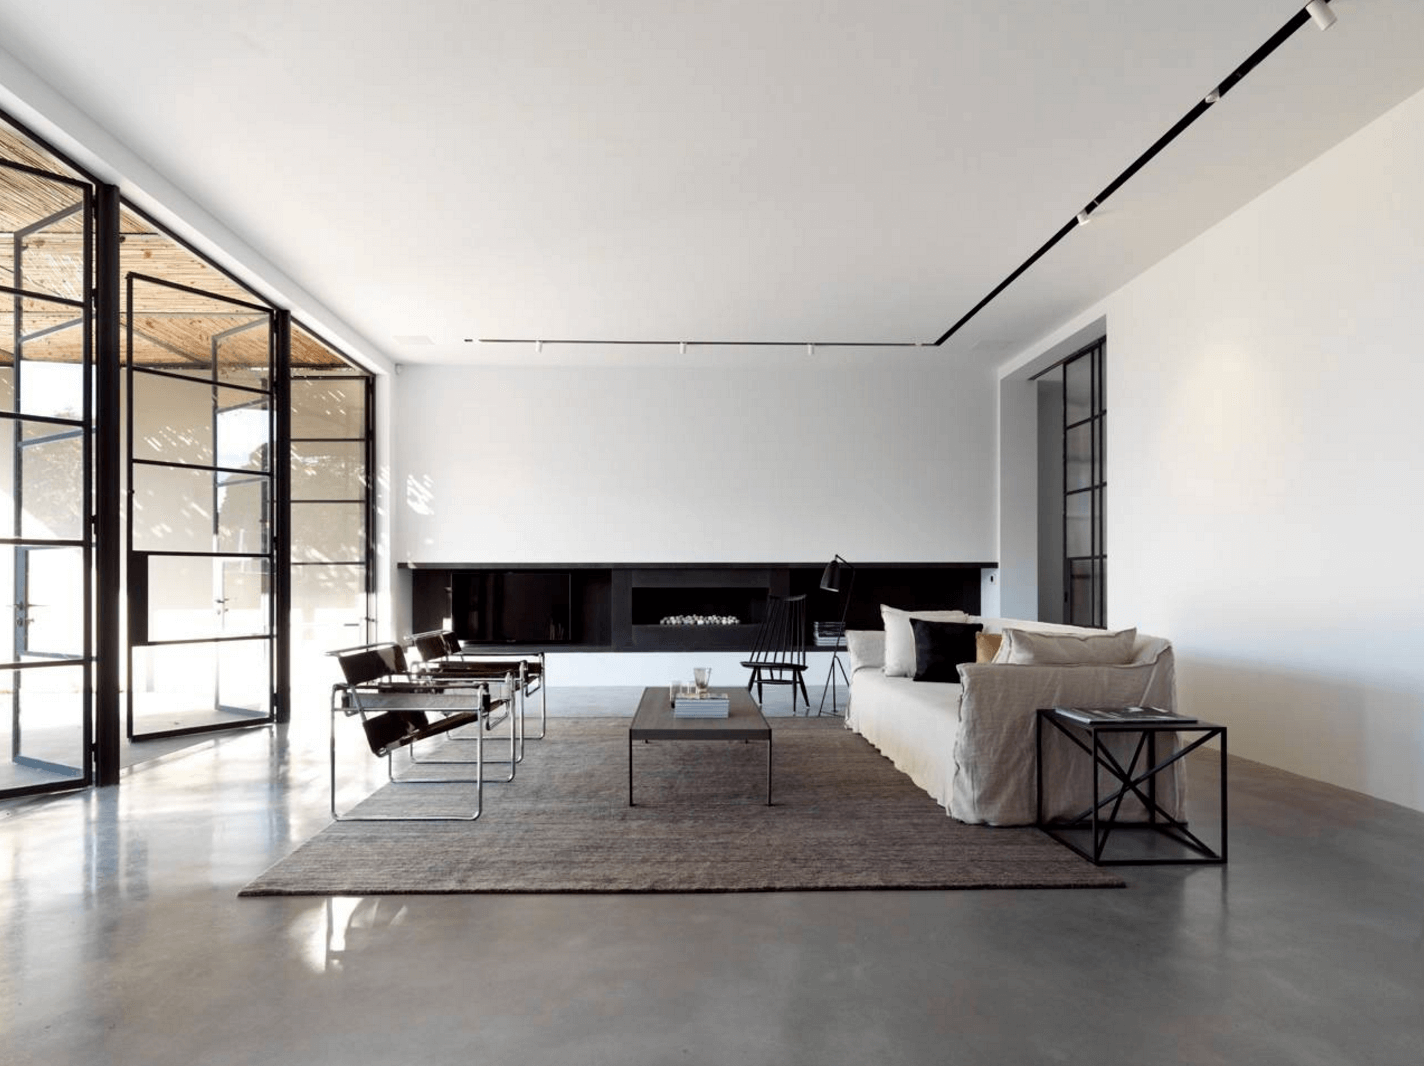 How to decorate in a minimalist interior design style ...